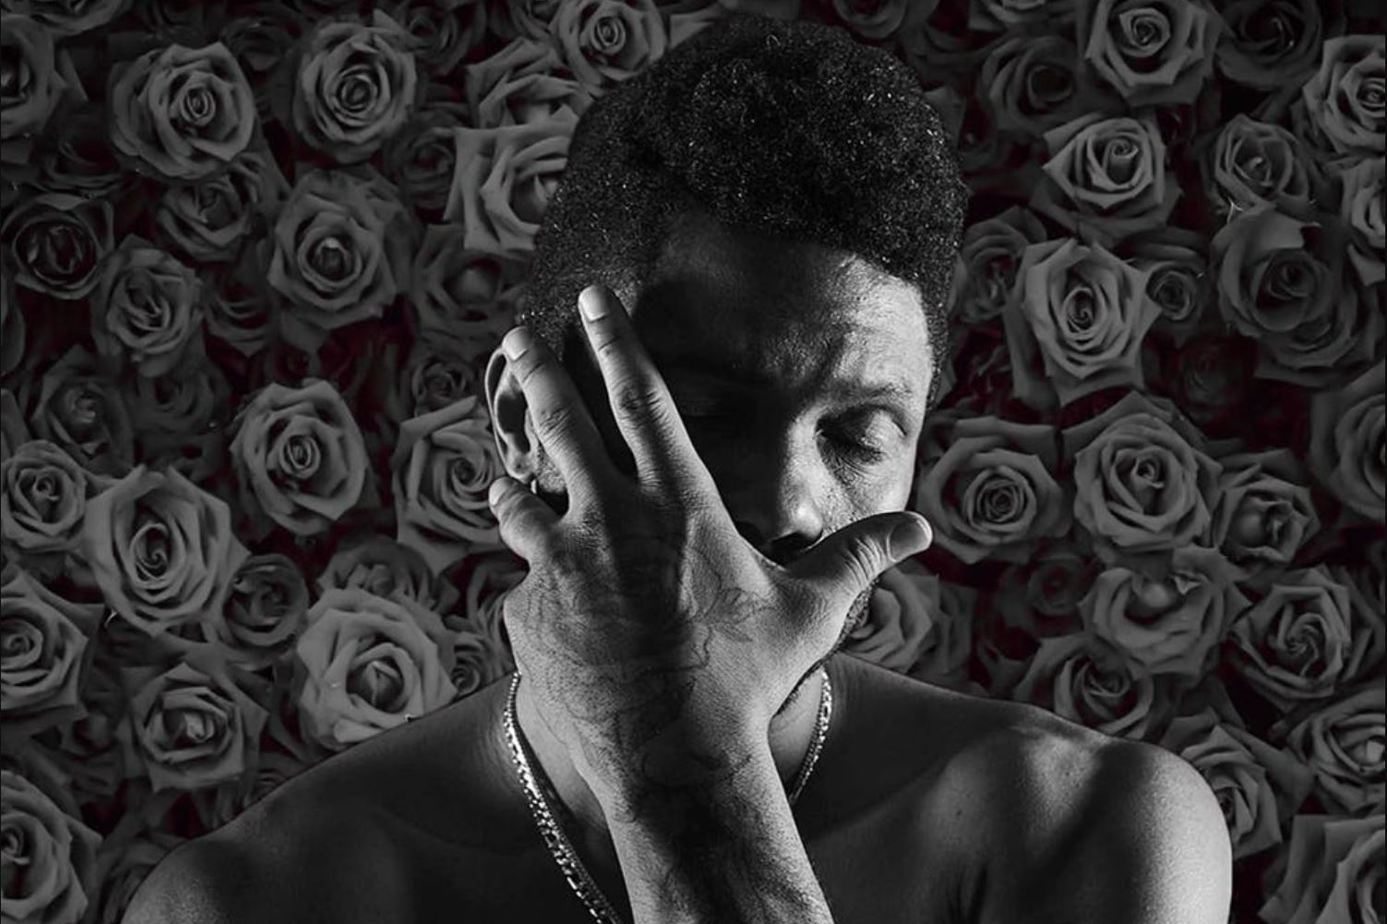 A black man covers his face with a rose tattoo on his hand and roses in the background. This man is Kaze 4 Letters